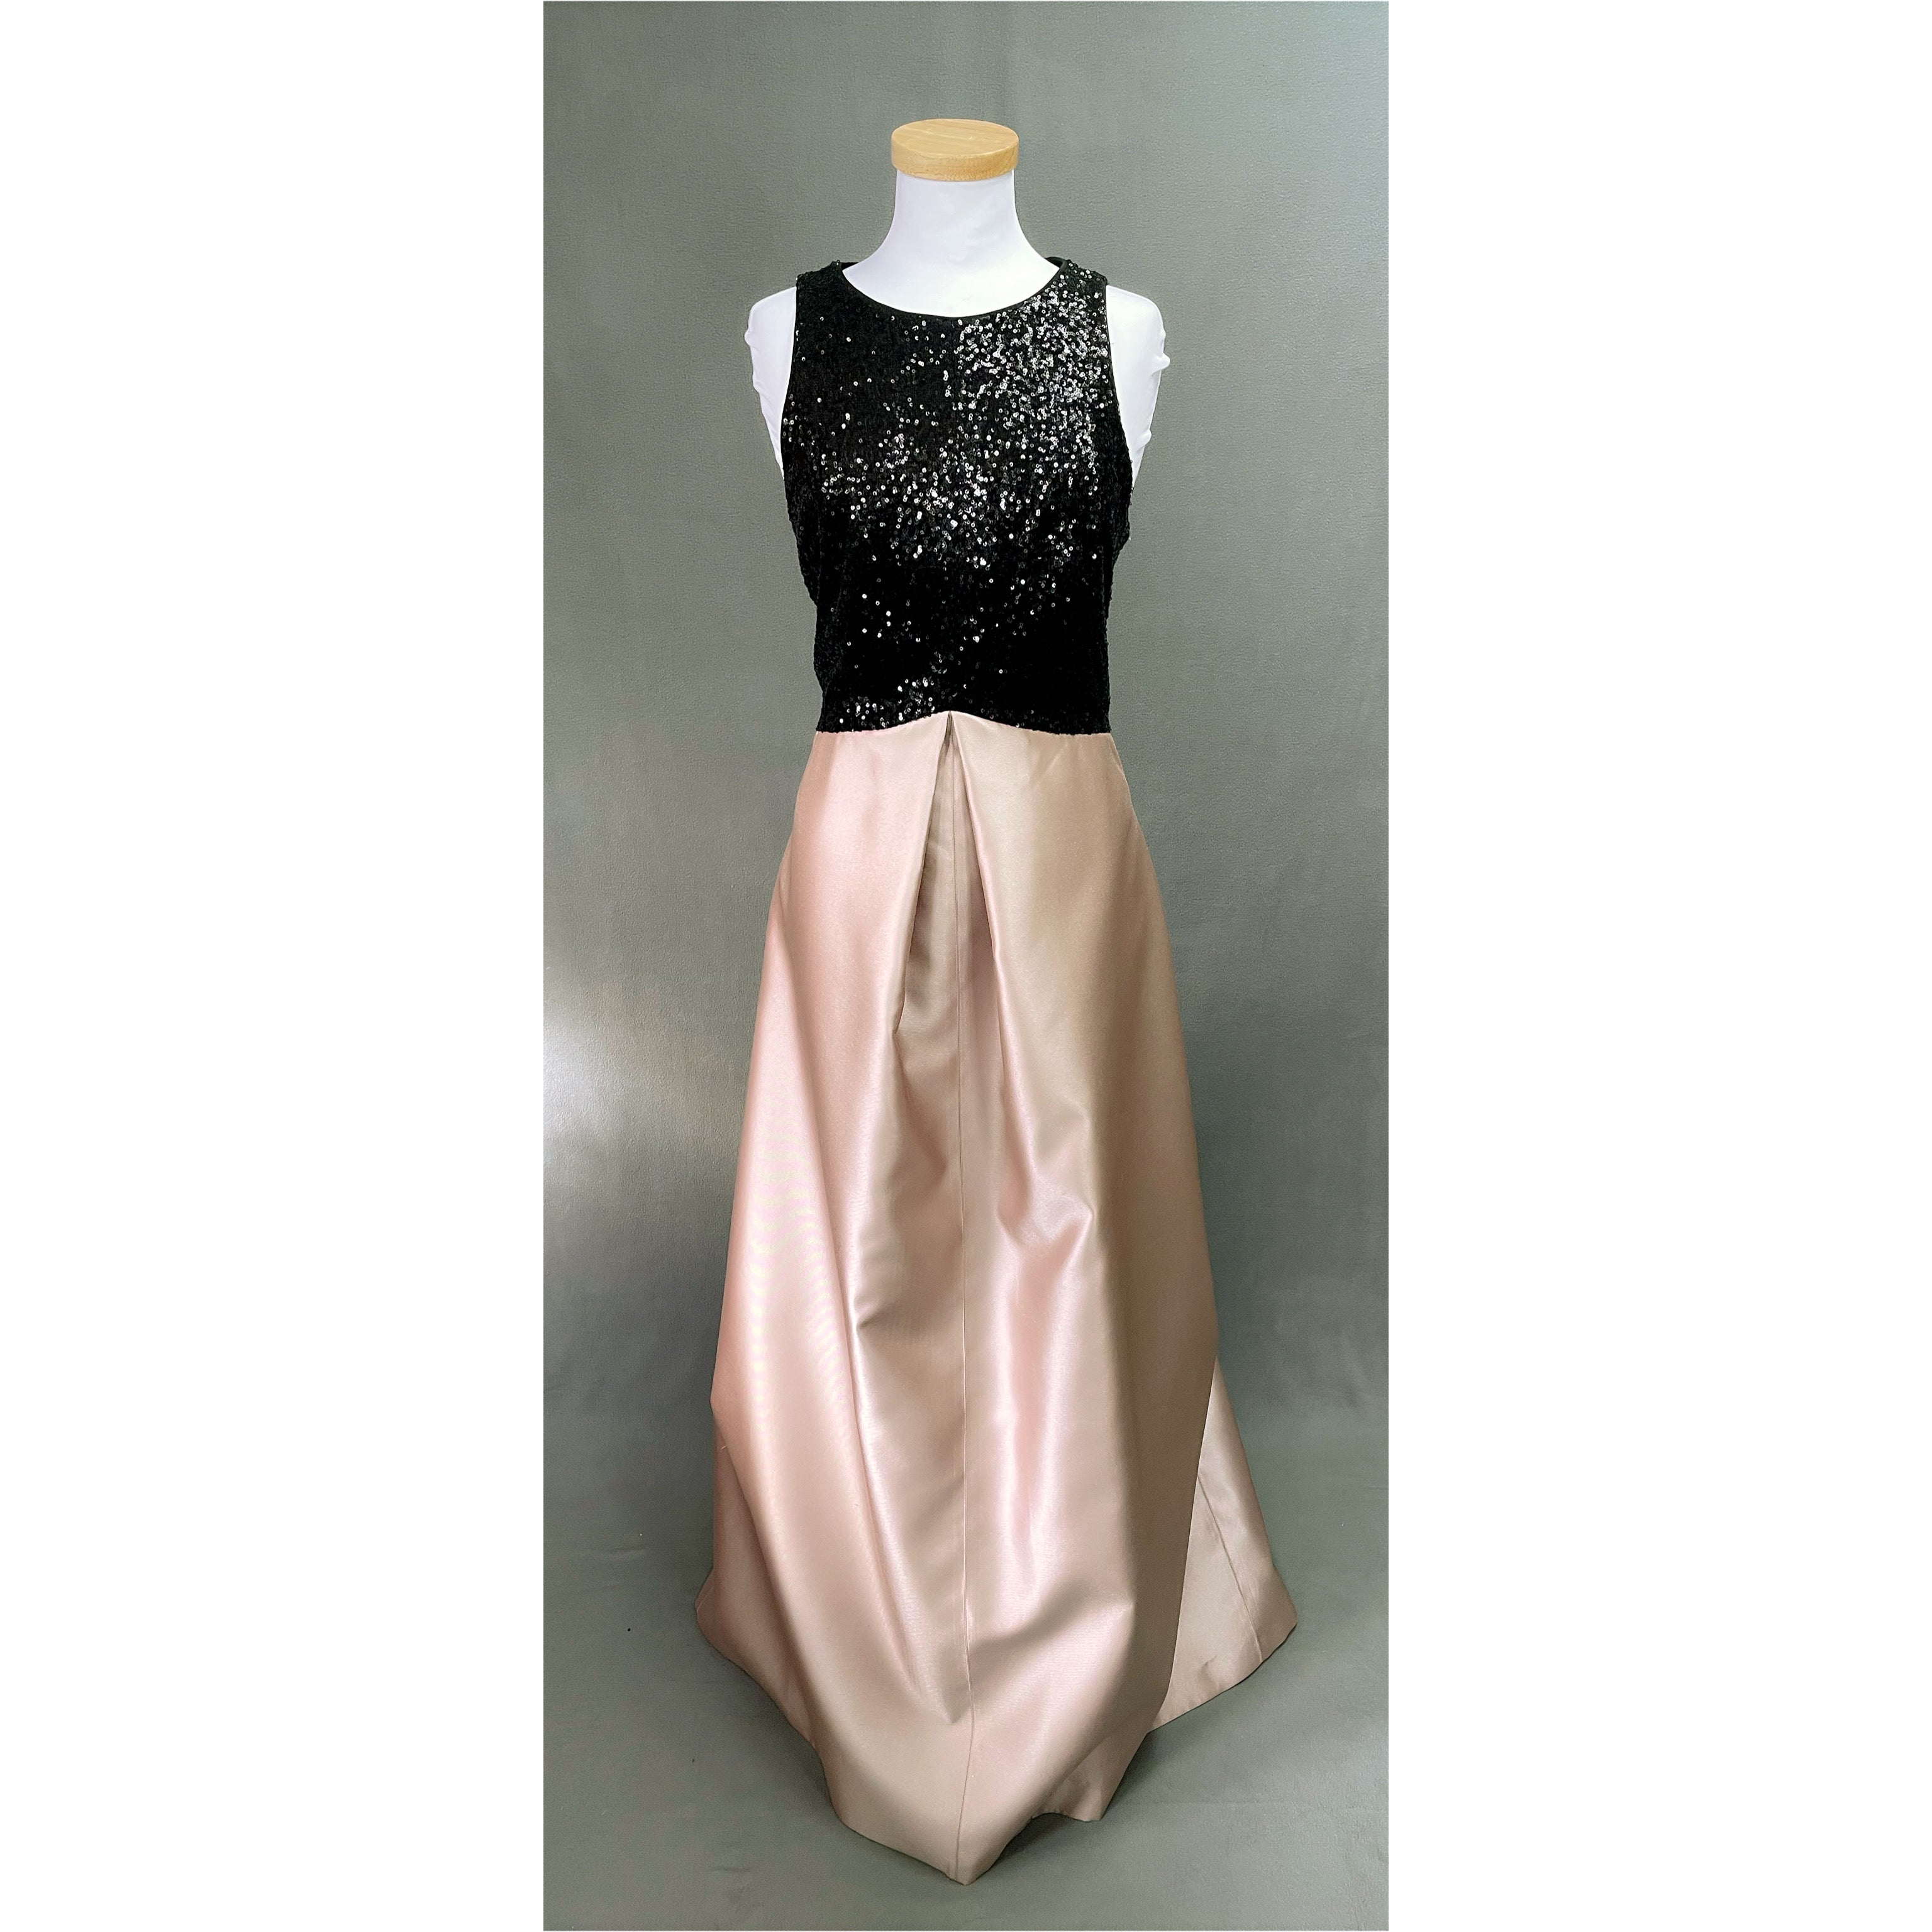 Cachet black and champagne dress, size 16